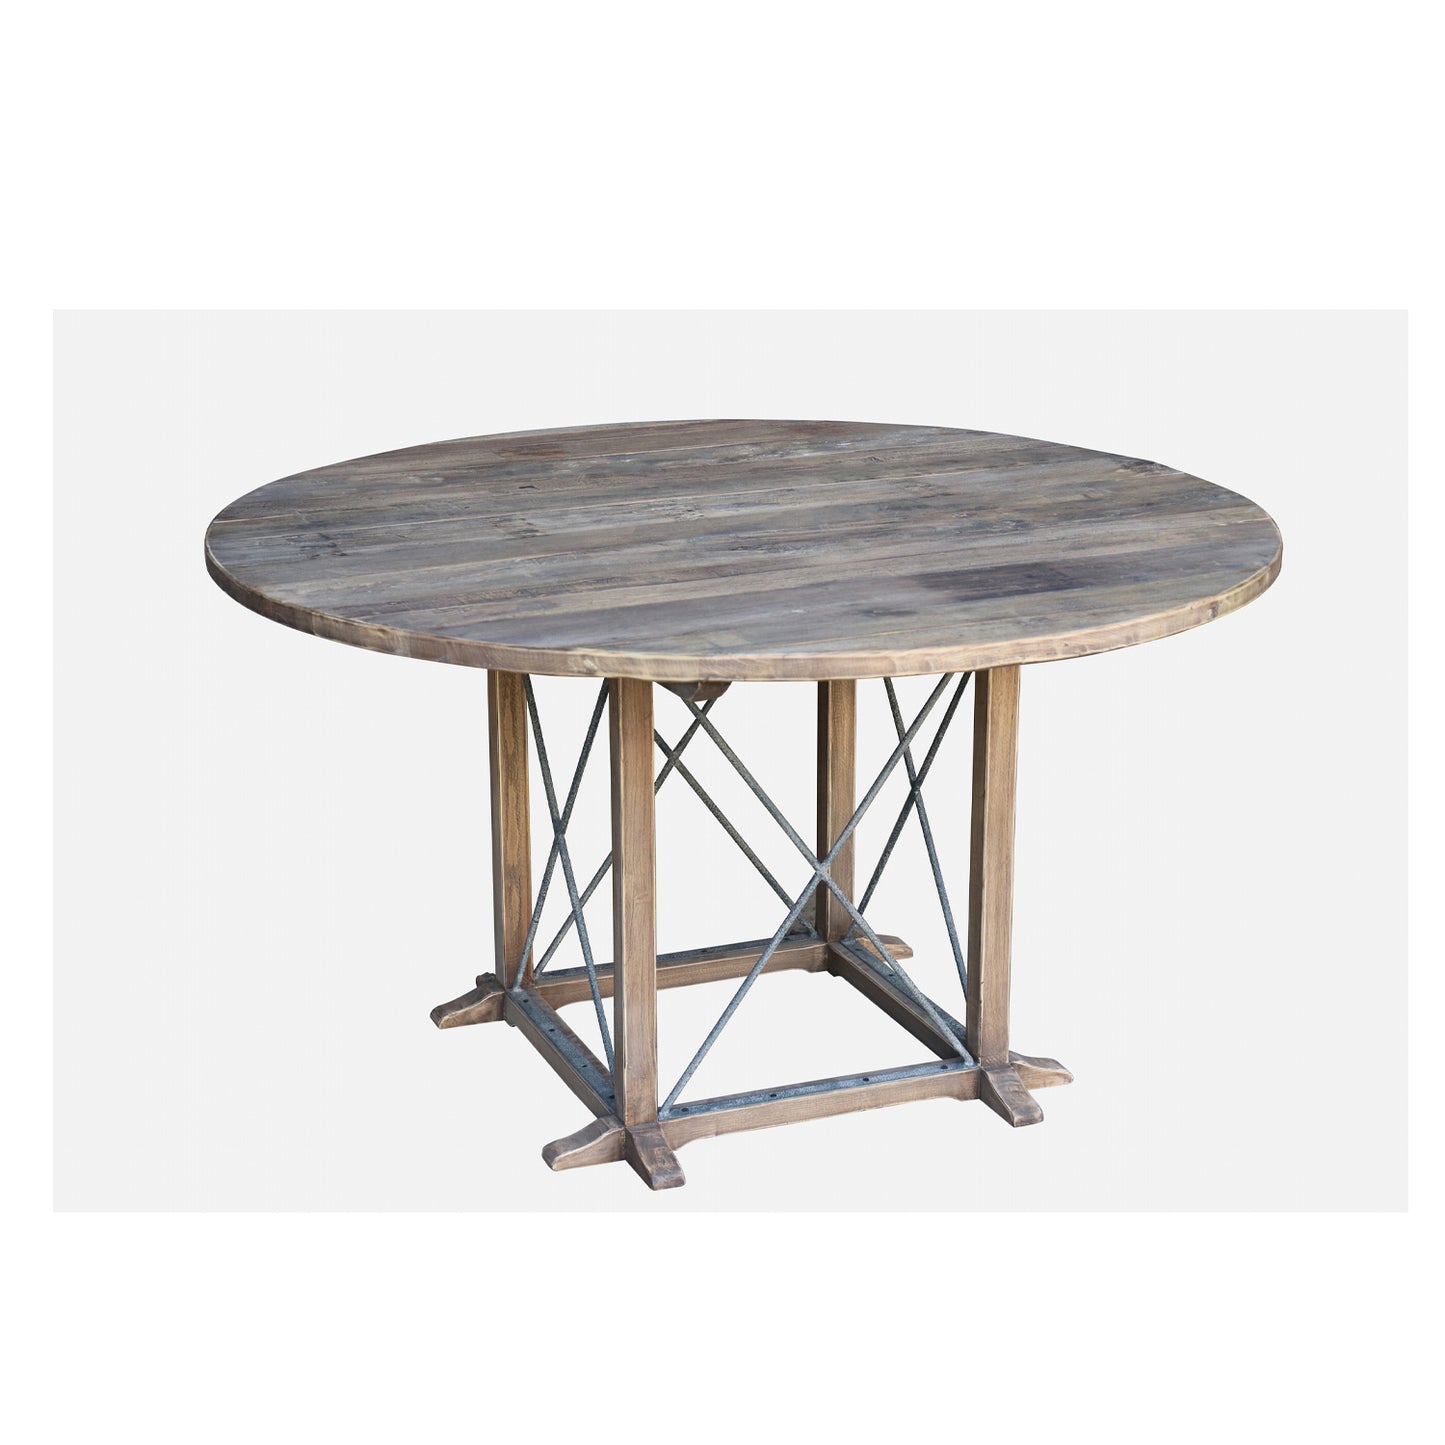 Lambs Green - Reclaimed Elm Round Dining Table with Iron Base